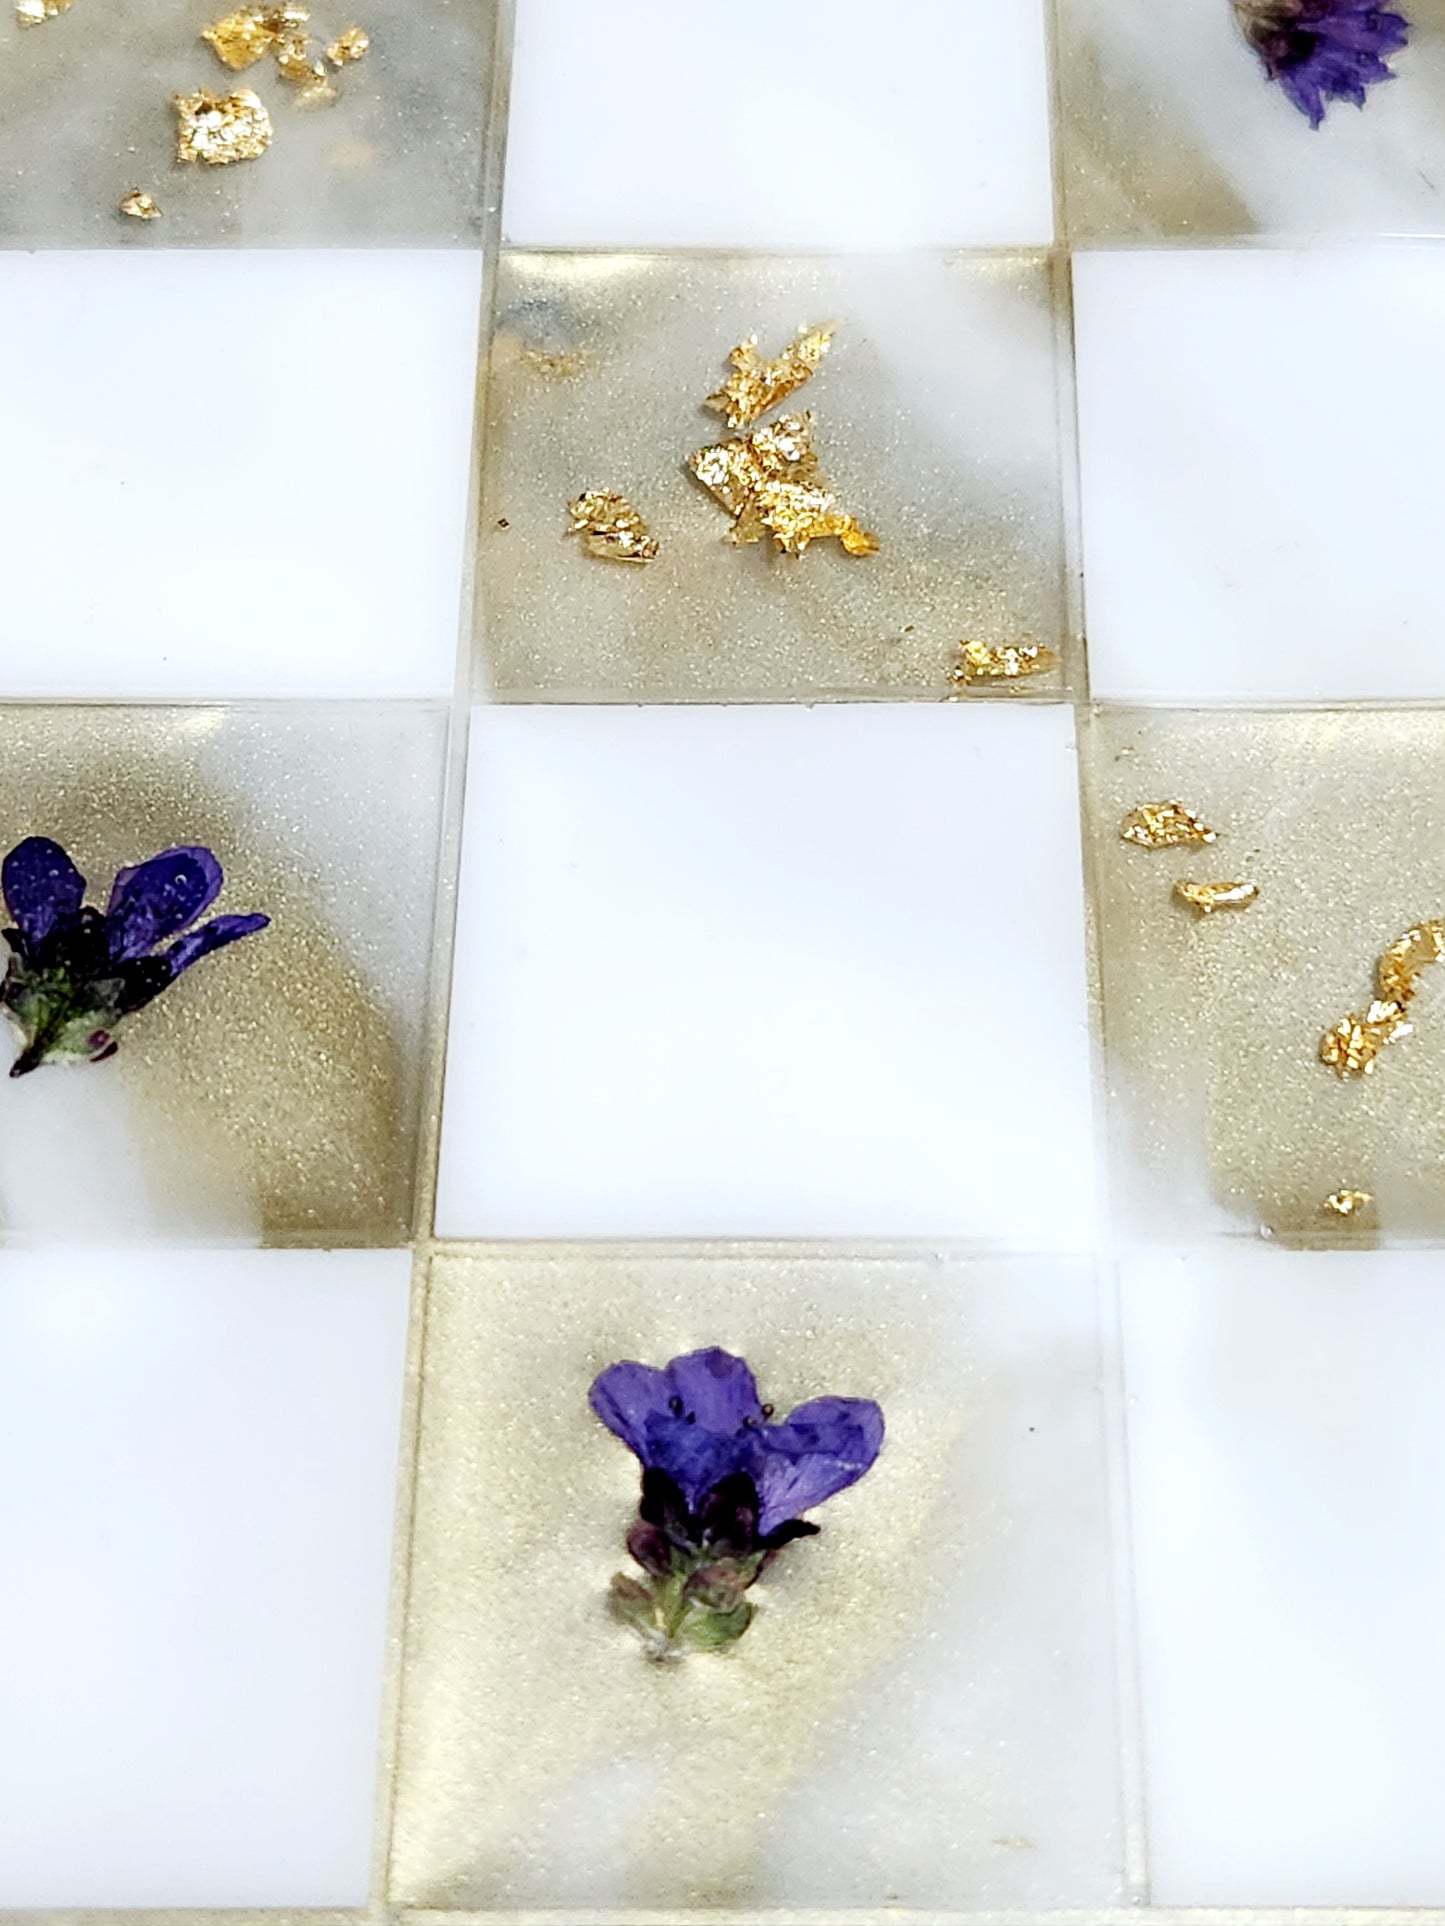 Chess set - board and pieces, purple saxifrage and gold foil.